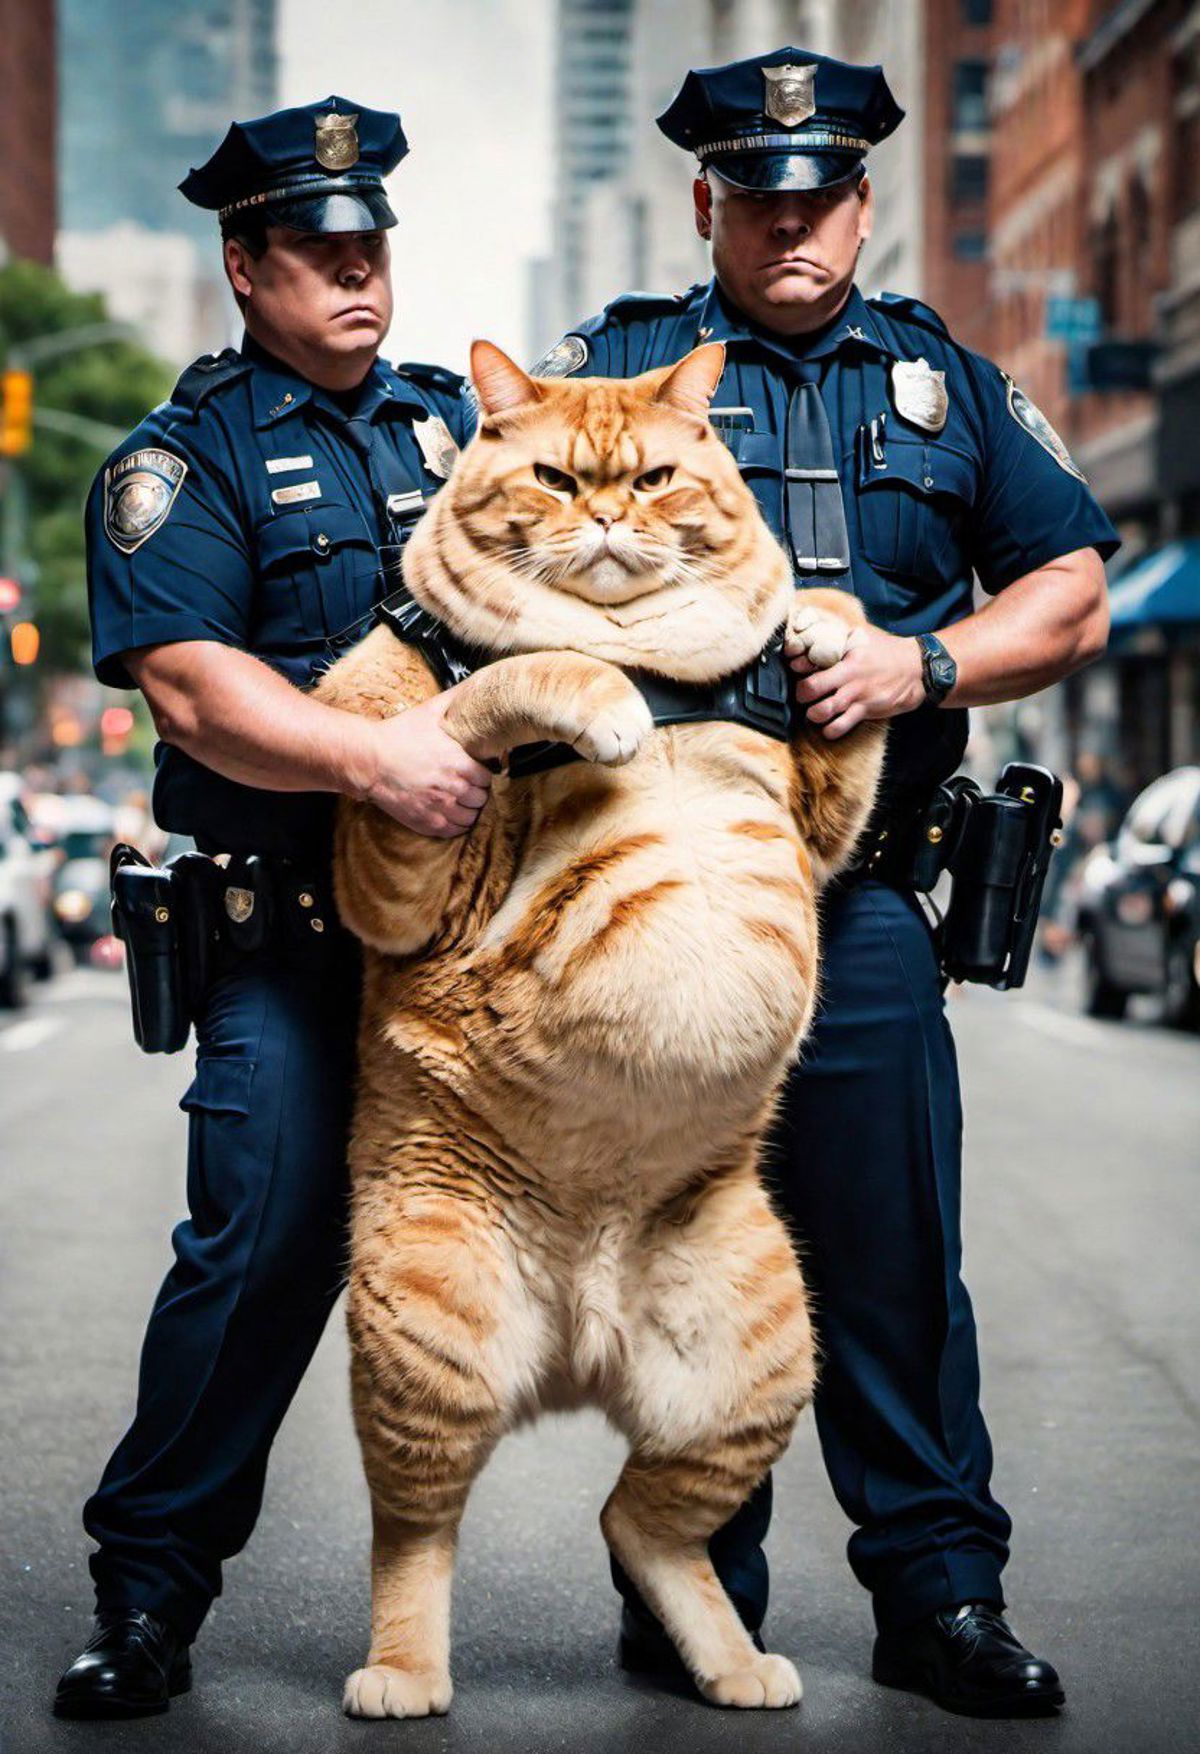 Two police officers holding a large orange cat, or possibly a large person in a cat costume.